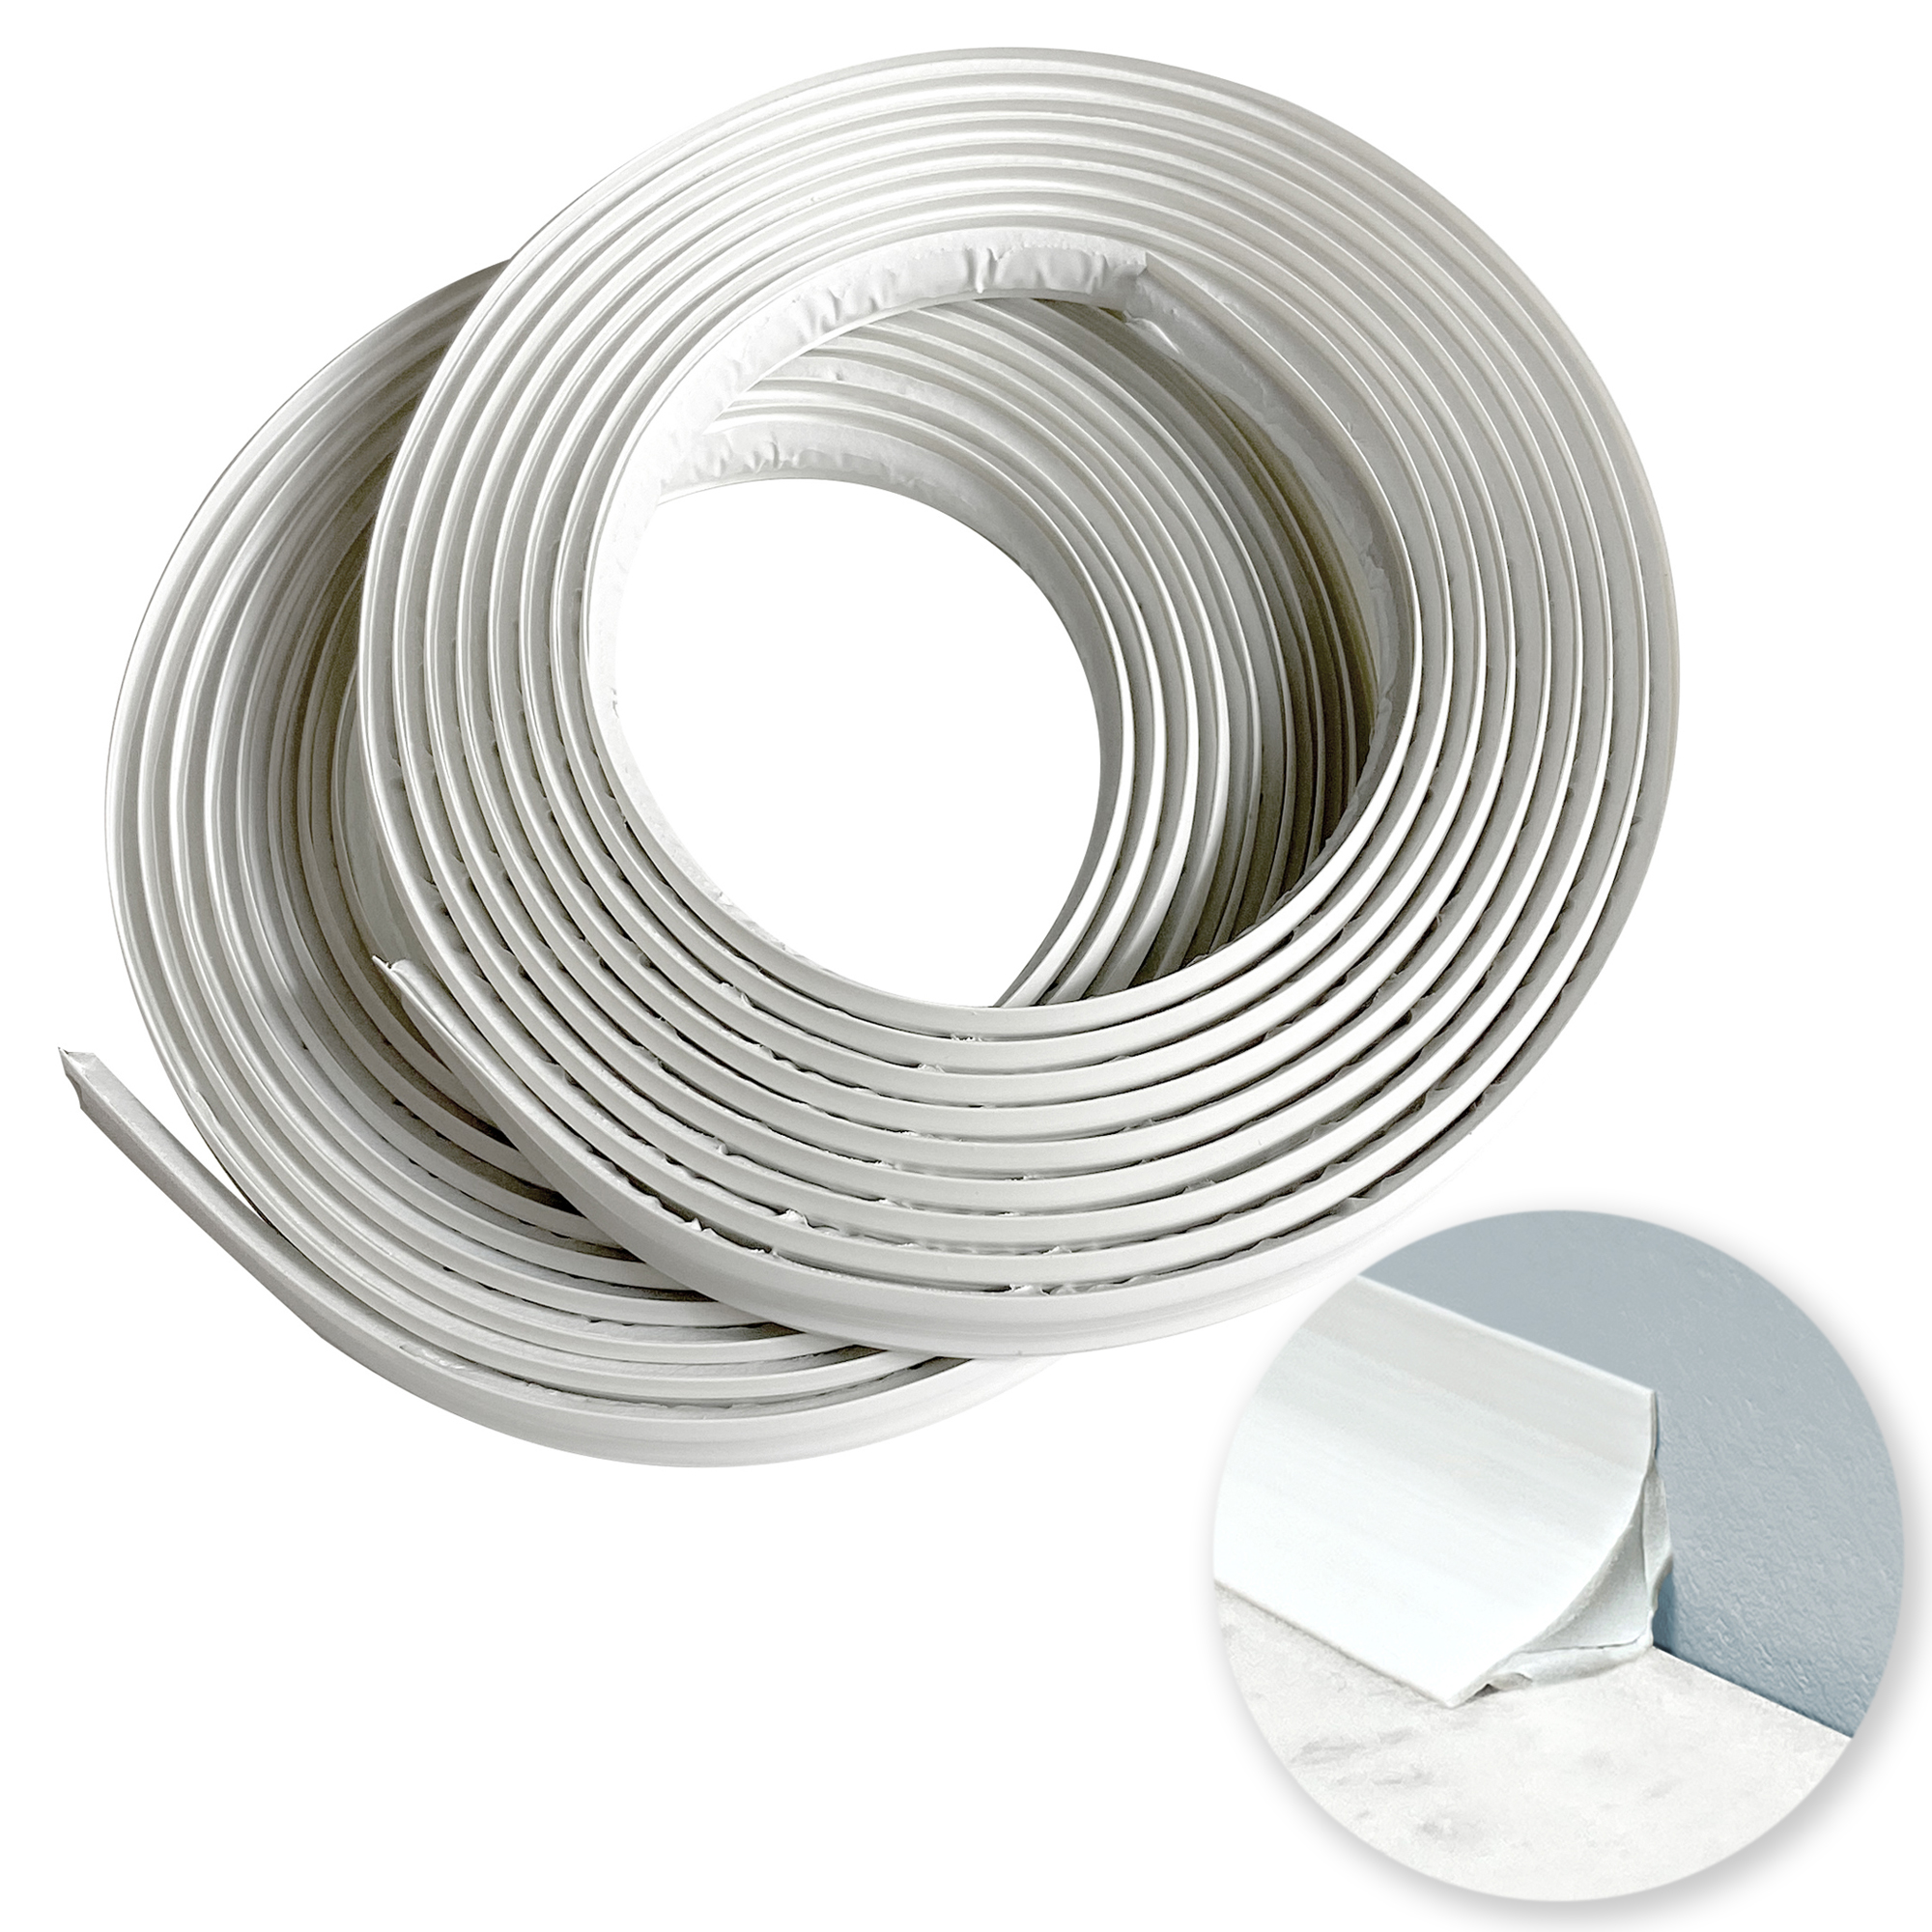 A17981 - 10 Ft Peel and Stick Trim for Backsplash Tile Edge, Self-Adhesive  Liner for Corner Decor in Stainless Steel